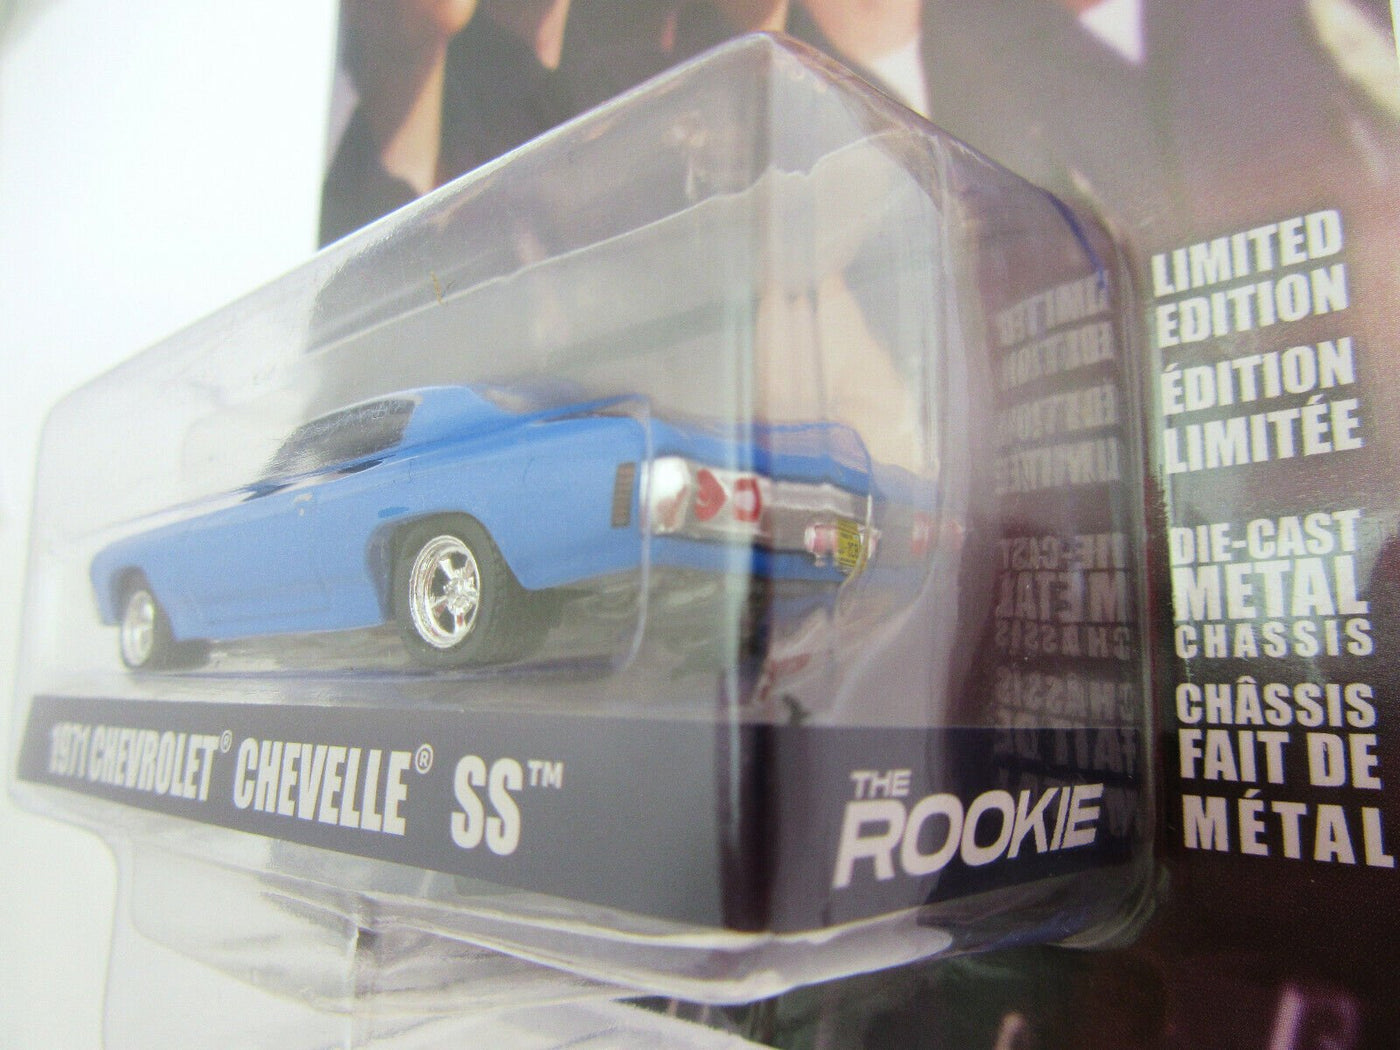 The Rookie ~ 1971 Chevrolet Chevelle SS ~ Greenlight Collectables ~ Die Cast